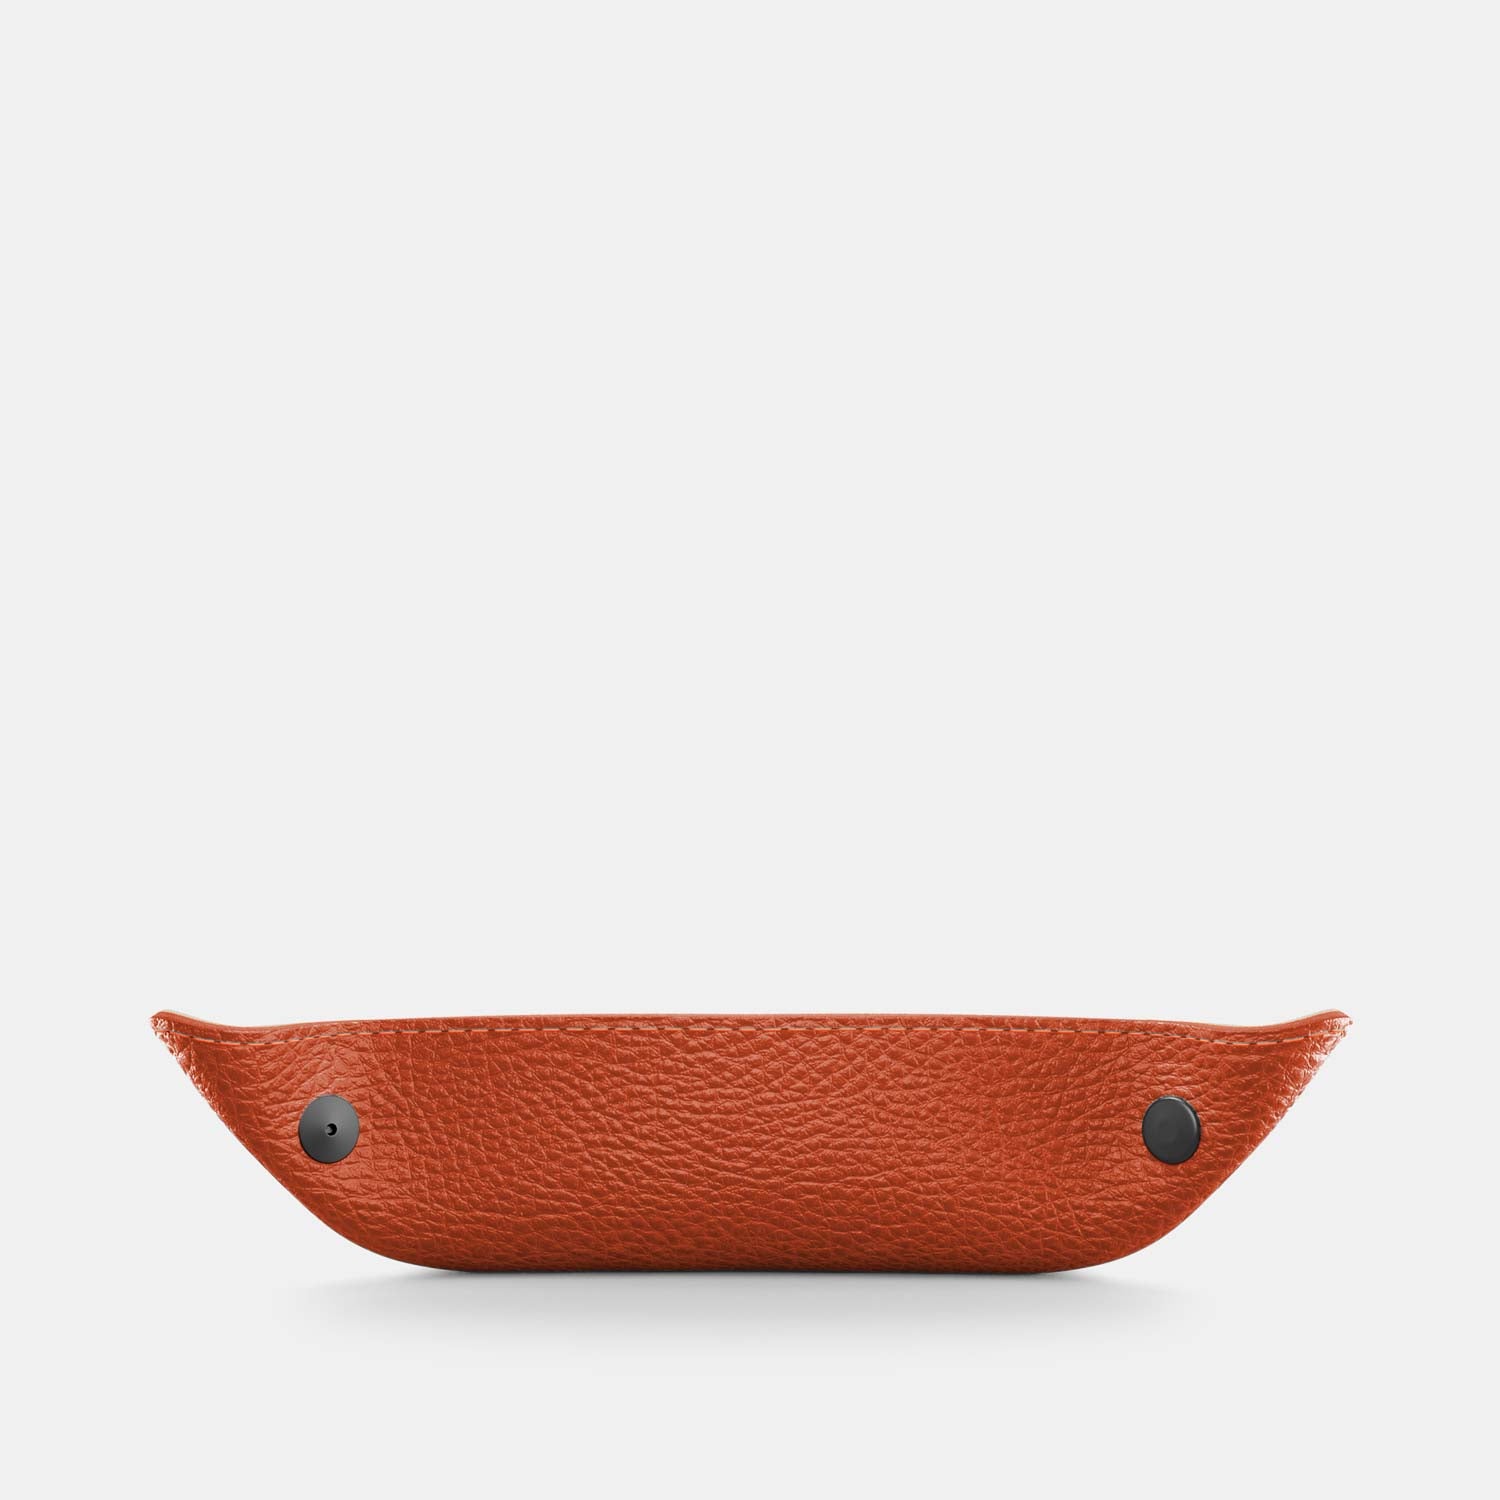 Leather Catch-all Tray - Orange and Beige - RYAN London